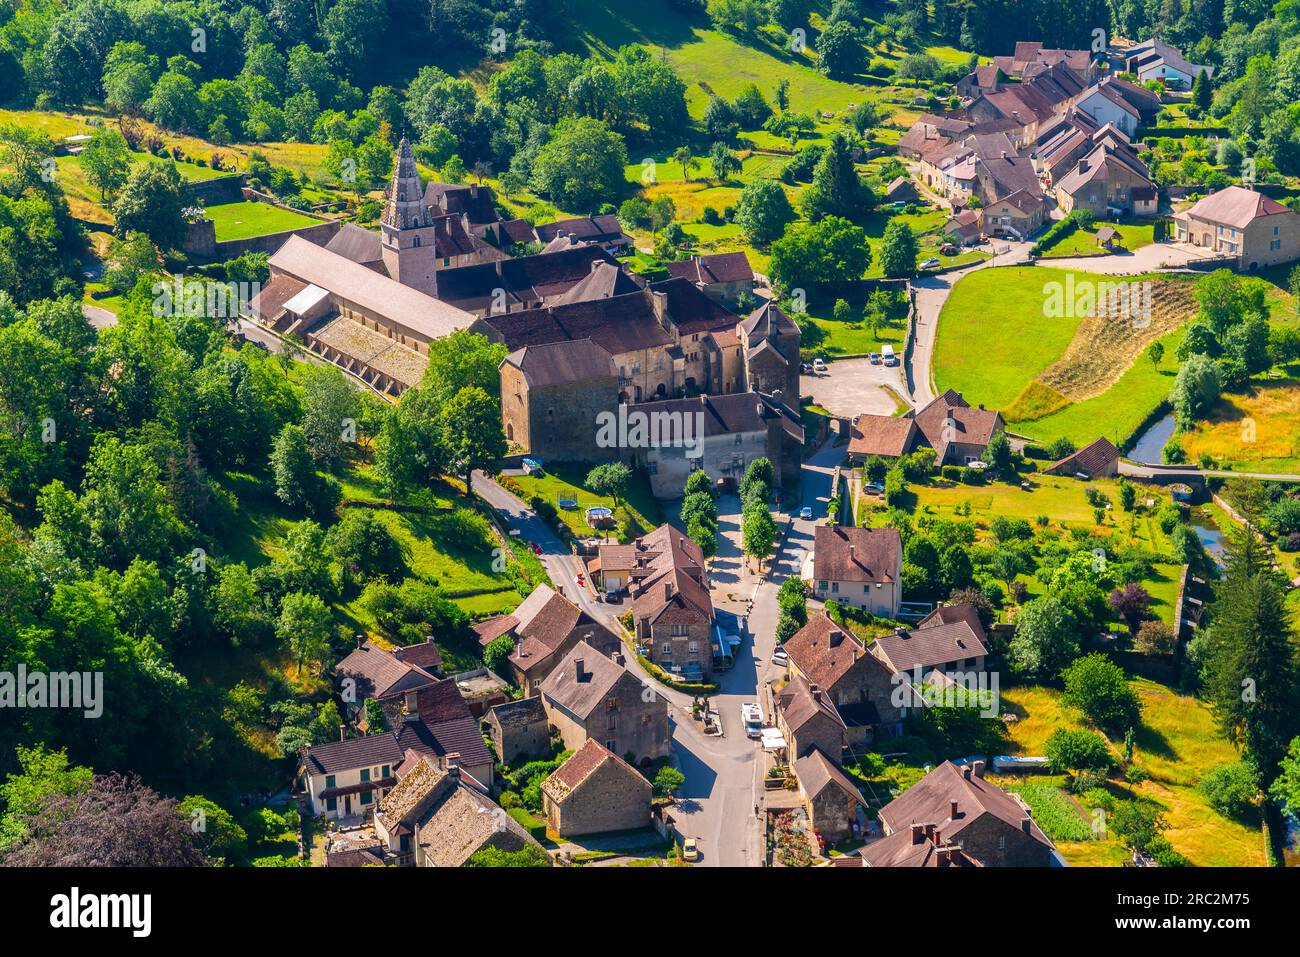 Aerial view over small and beautiful Baume Les Messieurs village nestled in the valley of Jura mountains. Jura department of Franche-Comte, France. Stock Photo